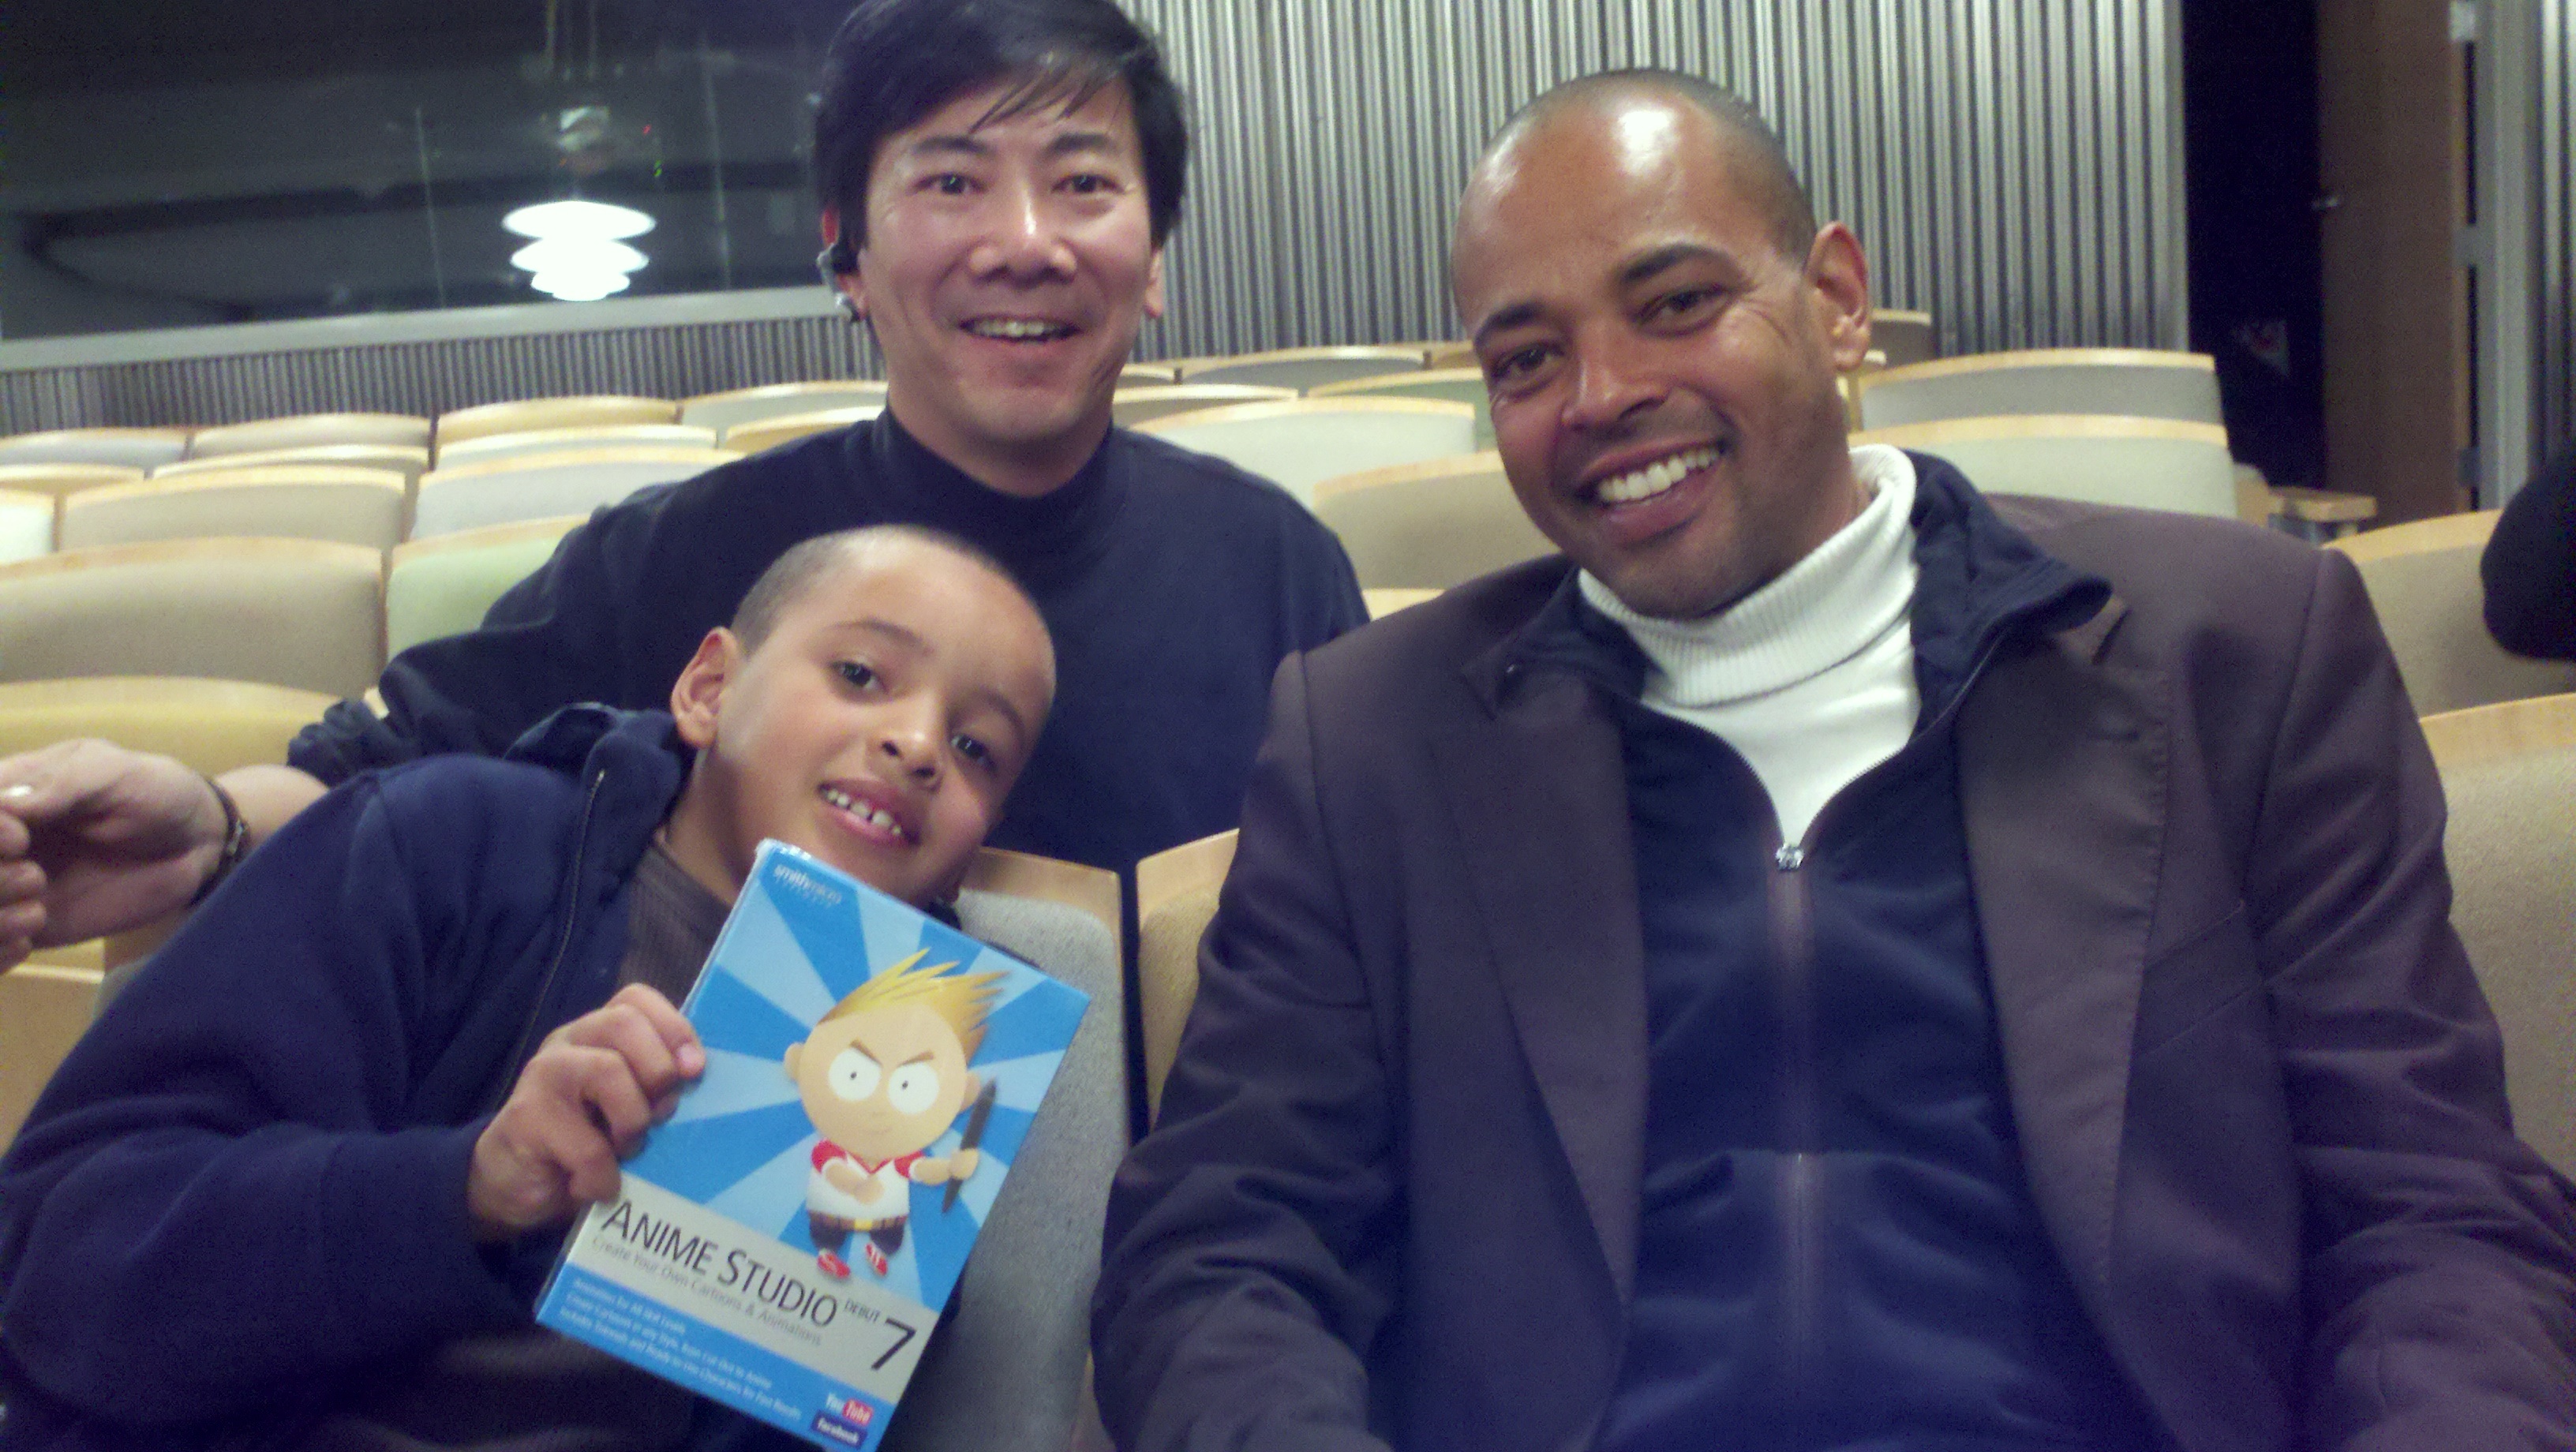 Craig Lew gives away Anime Studio Animation software at the Los Angeles International Children's Film Festival.